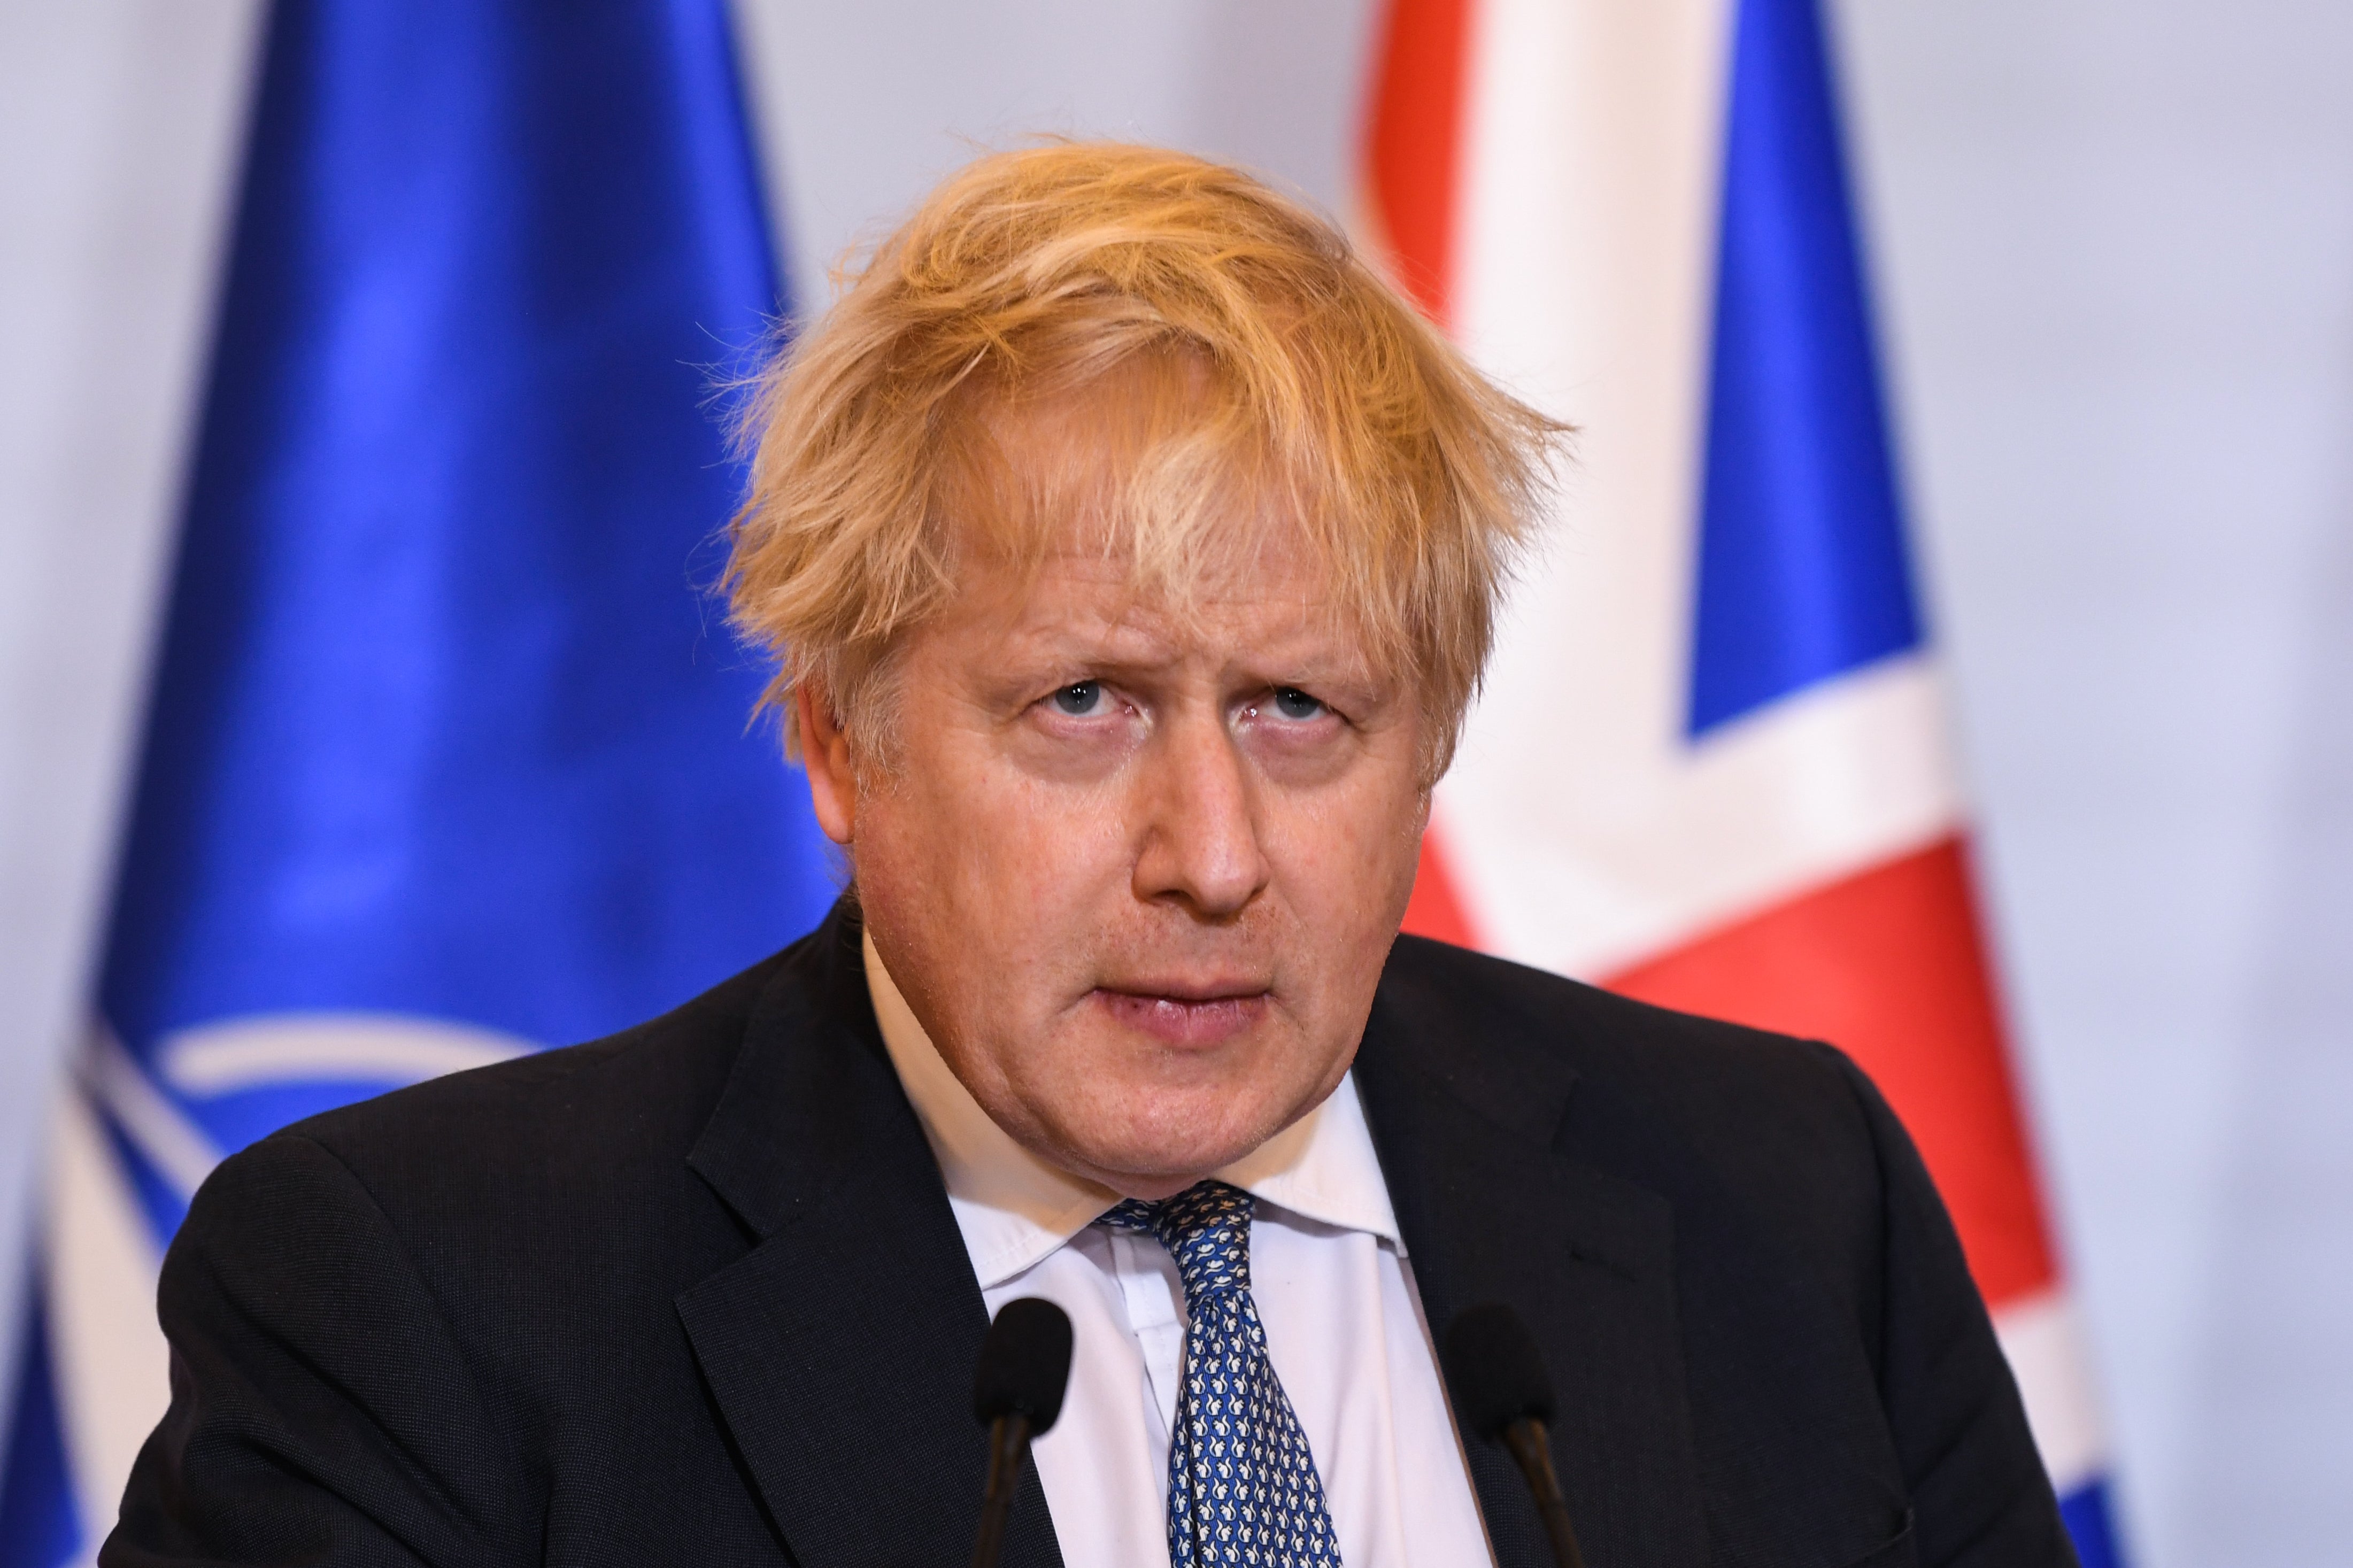 Boris Johnson has declined to say if he will resign in the event of being fined